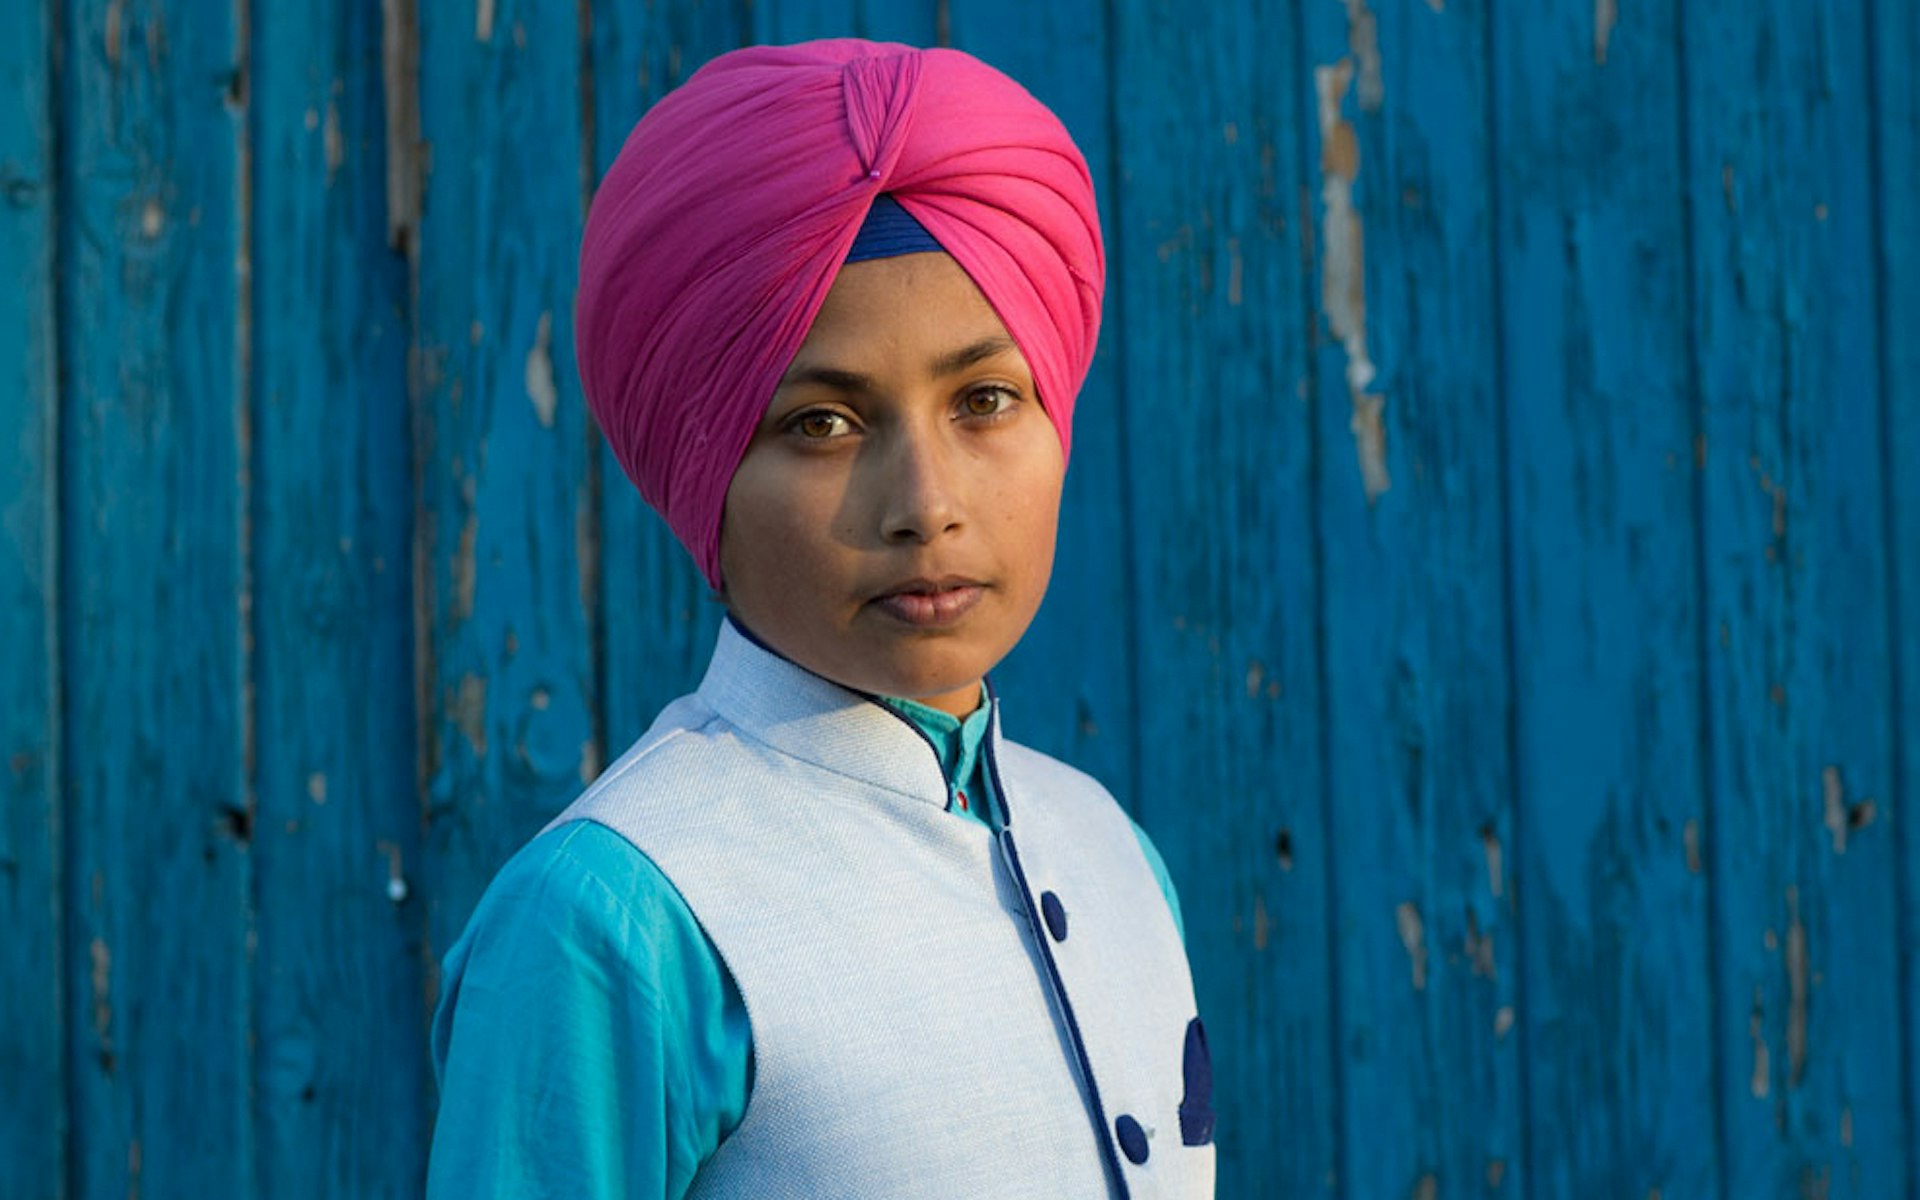 A glowing portrait of religious diversity in London